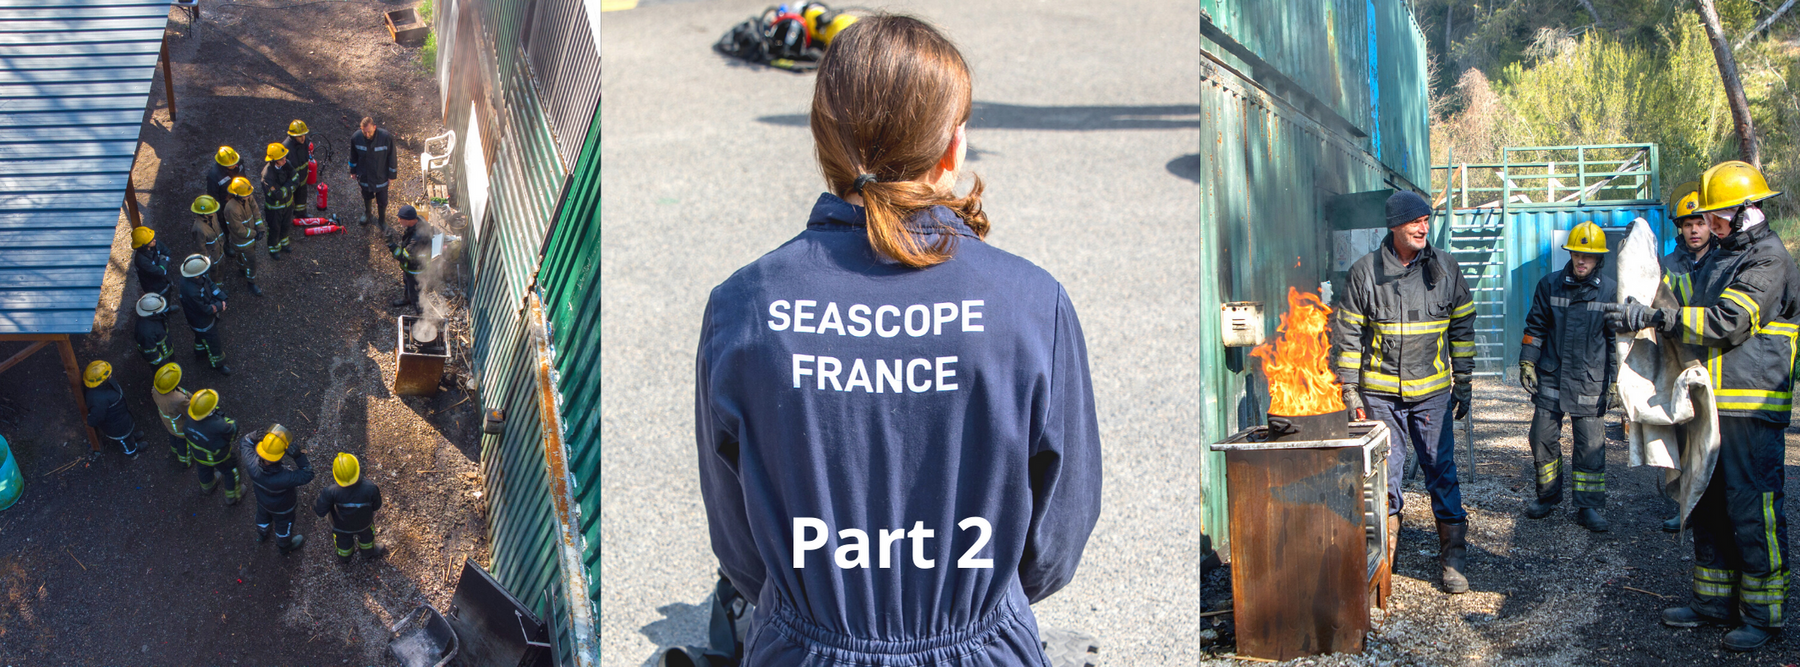 New yachtie’s view: 5 day Basic Safety Training Course with Seascope France